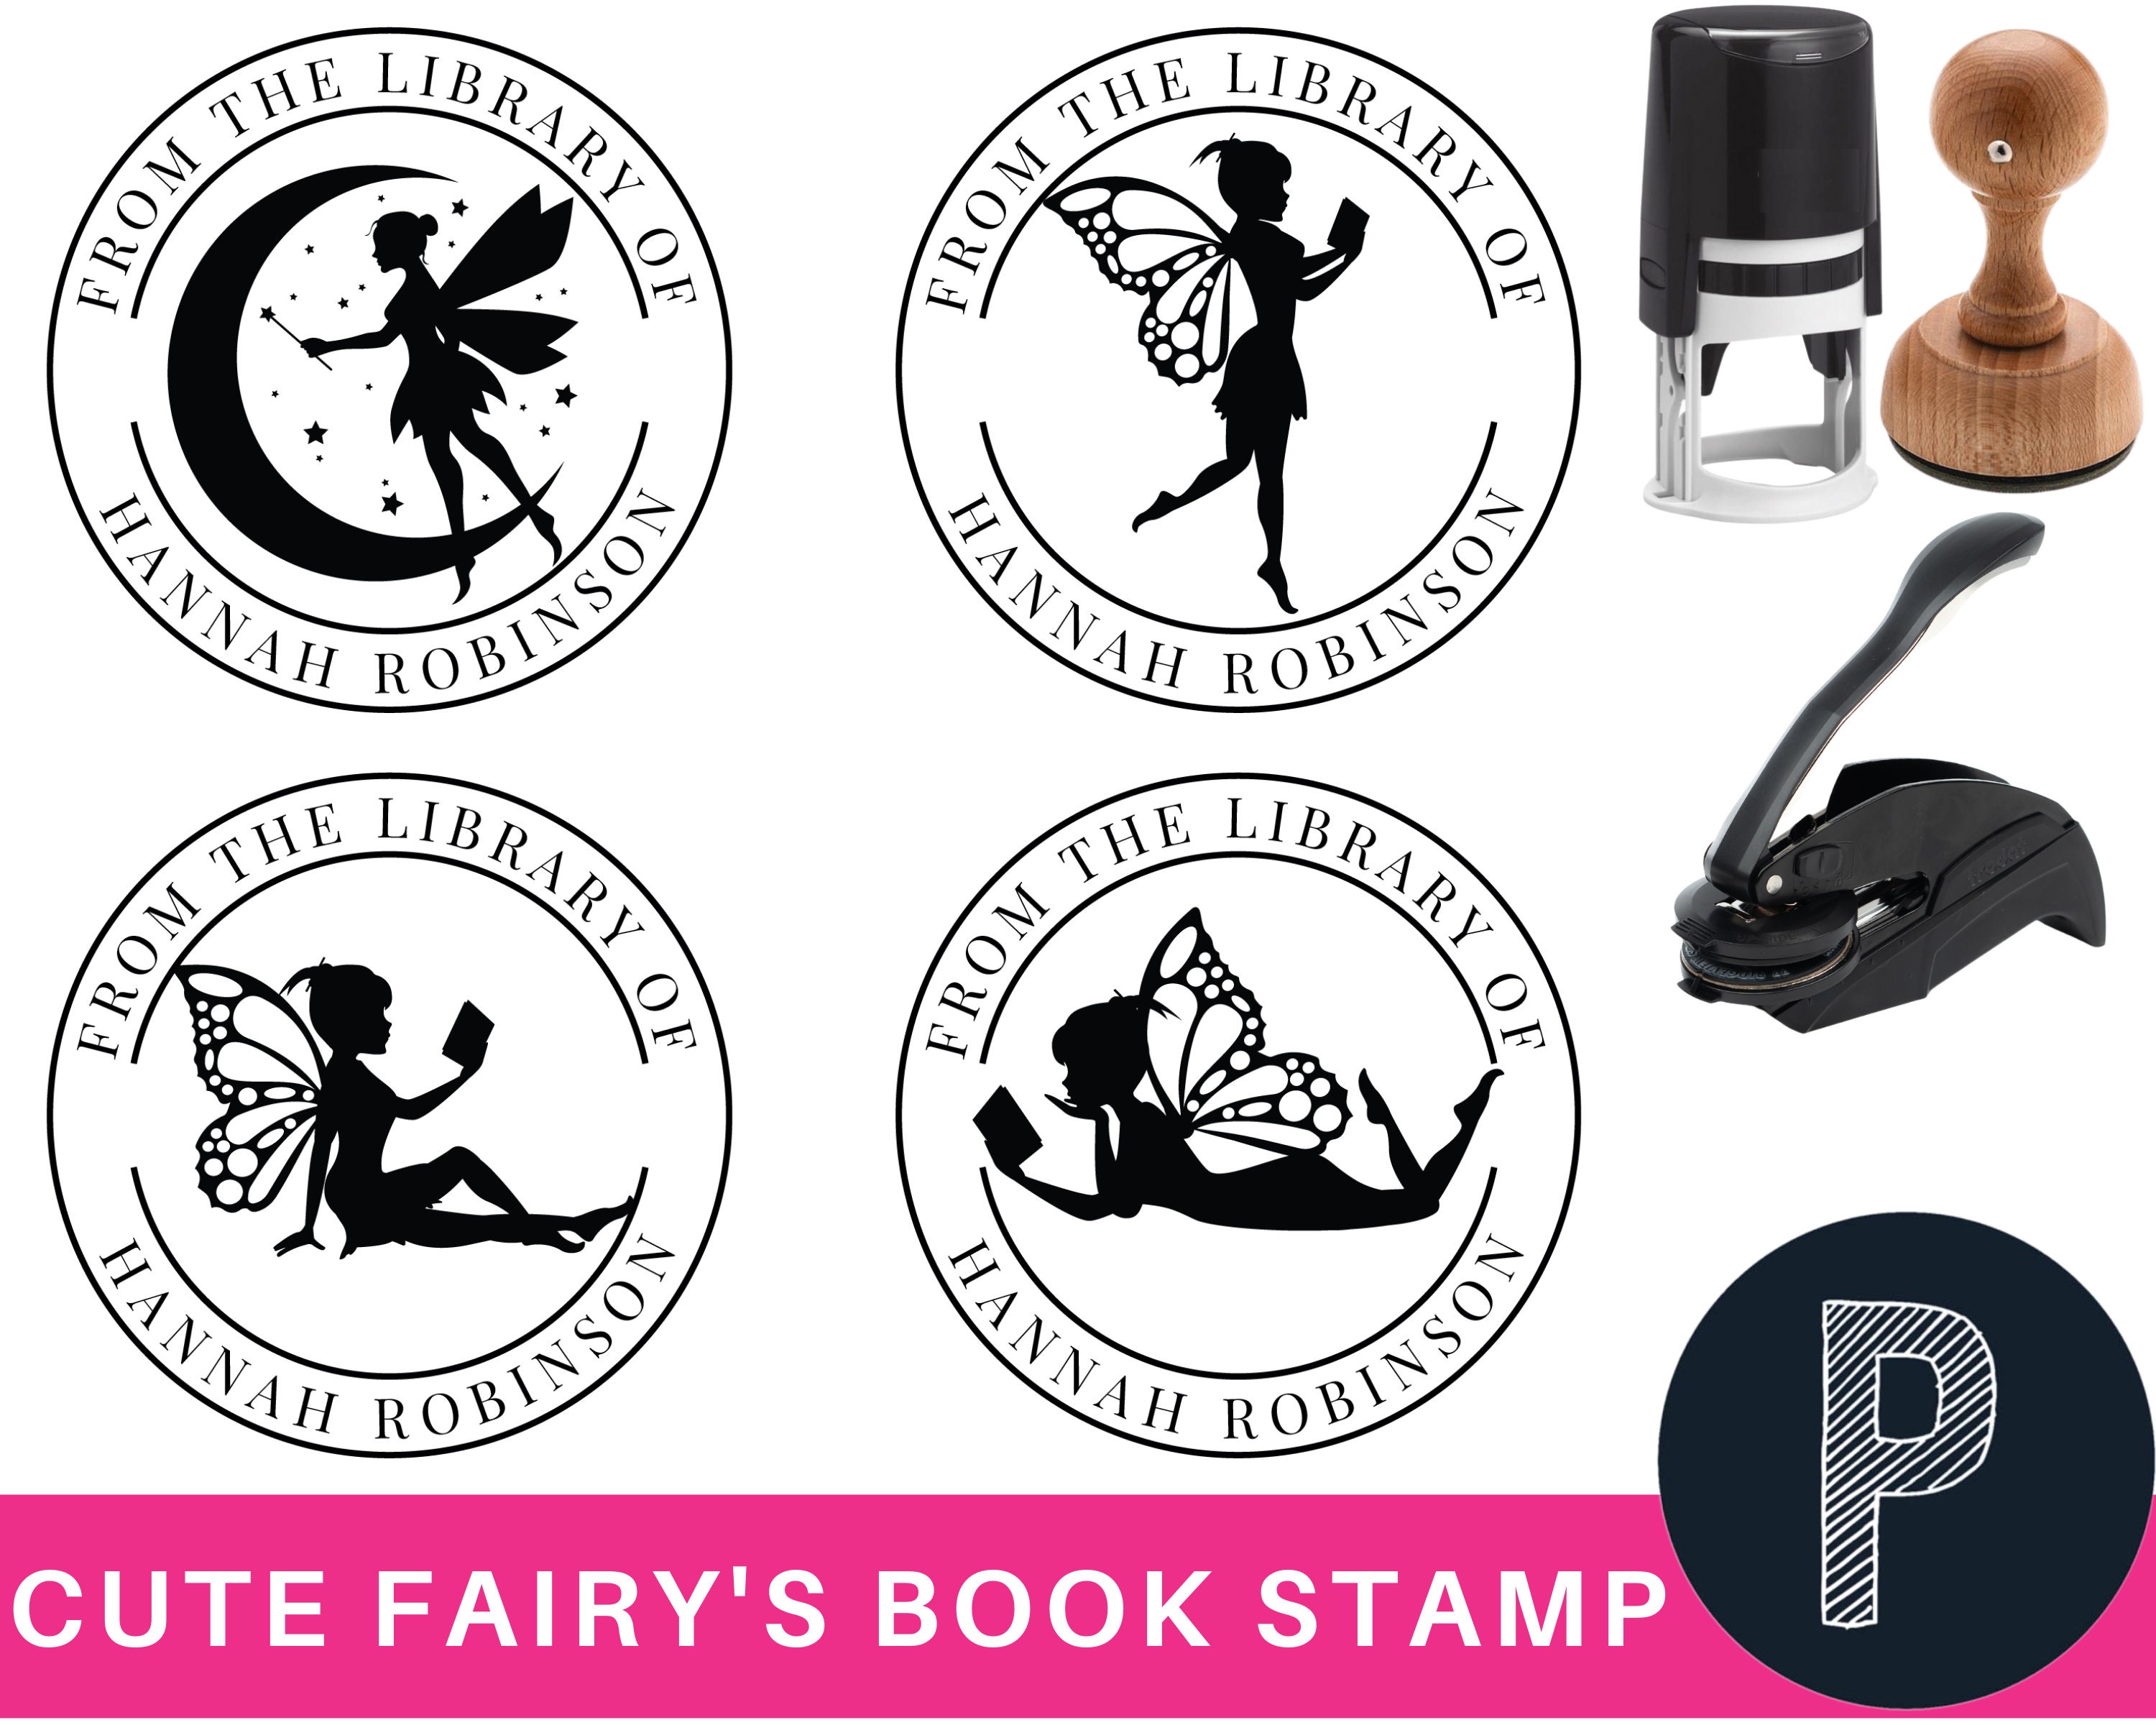 BEST SELLING Personal Name Library Stamp, Custom Personalized Gift, Teacher  Gift, Round Logo Stamp, Library Book Stamp, School Stamp 